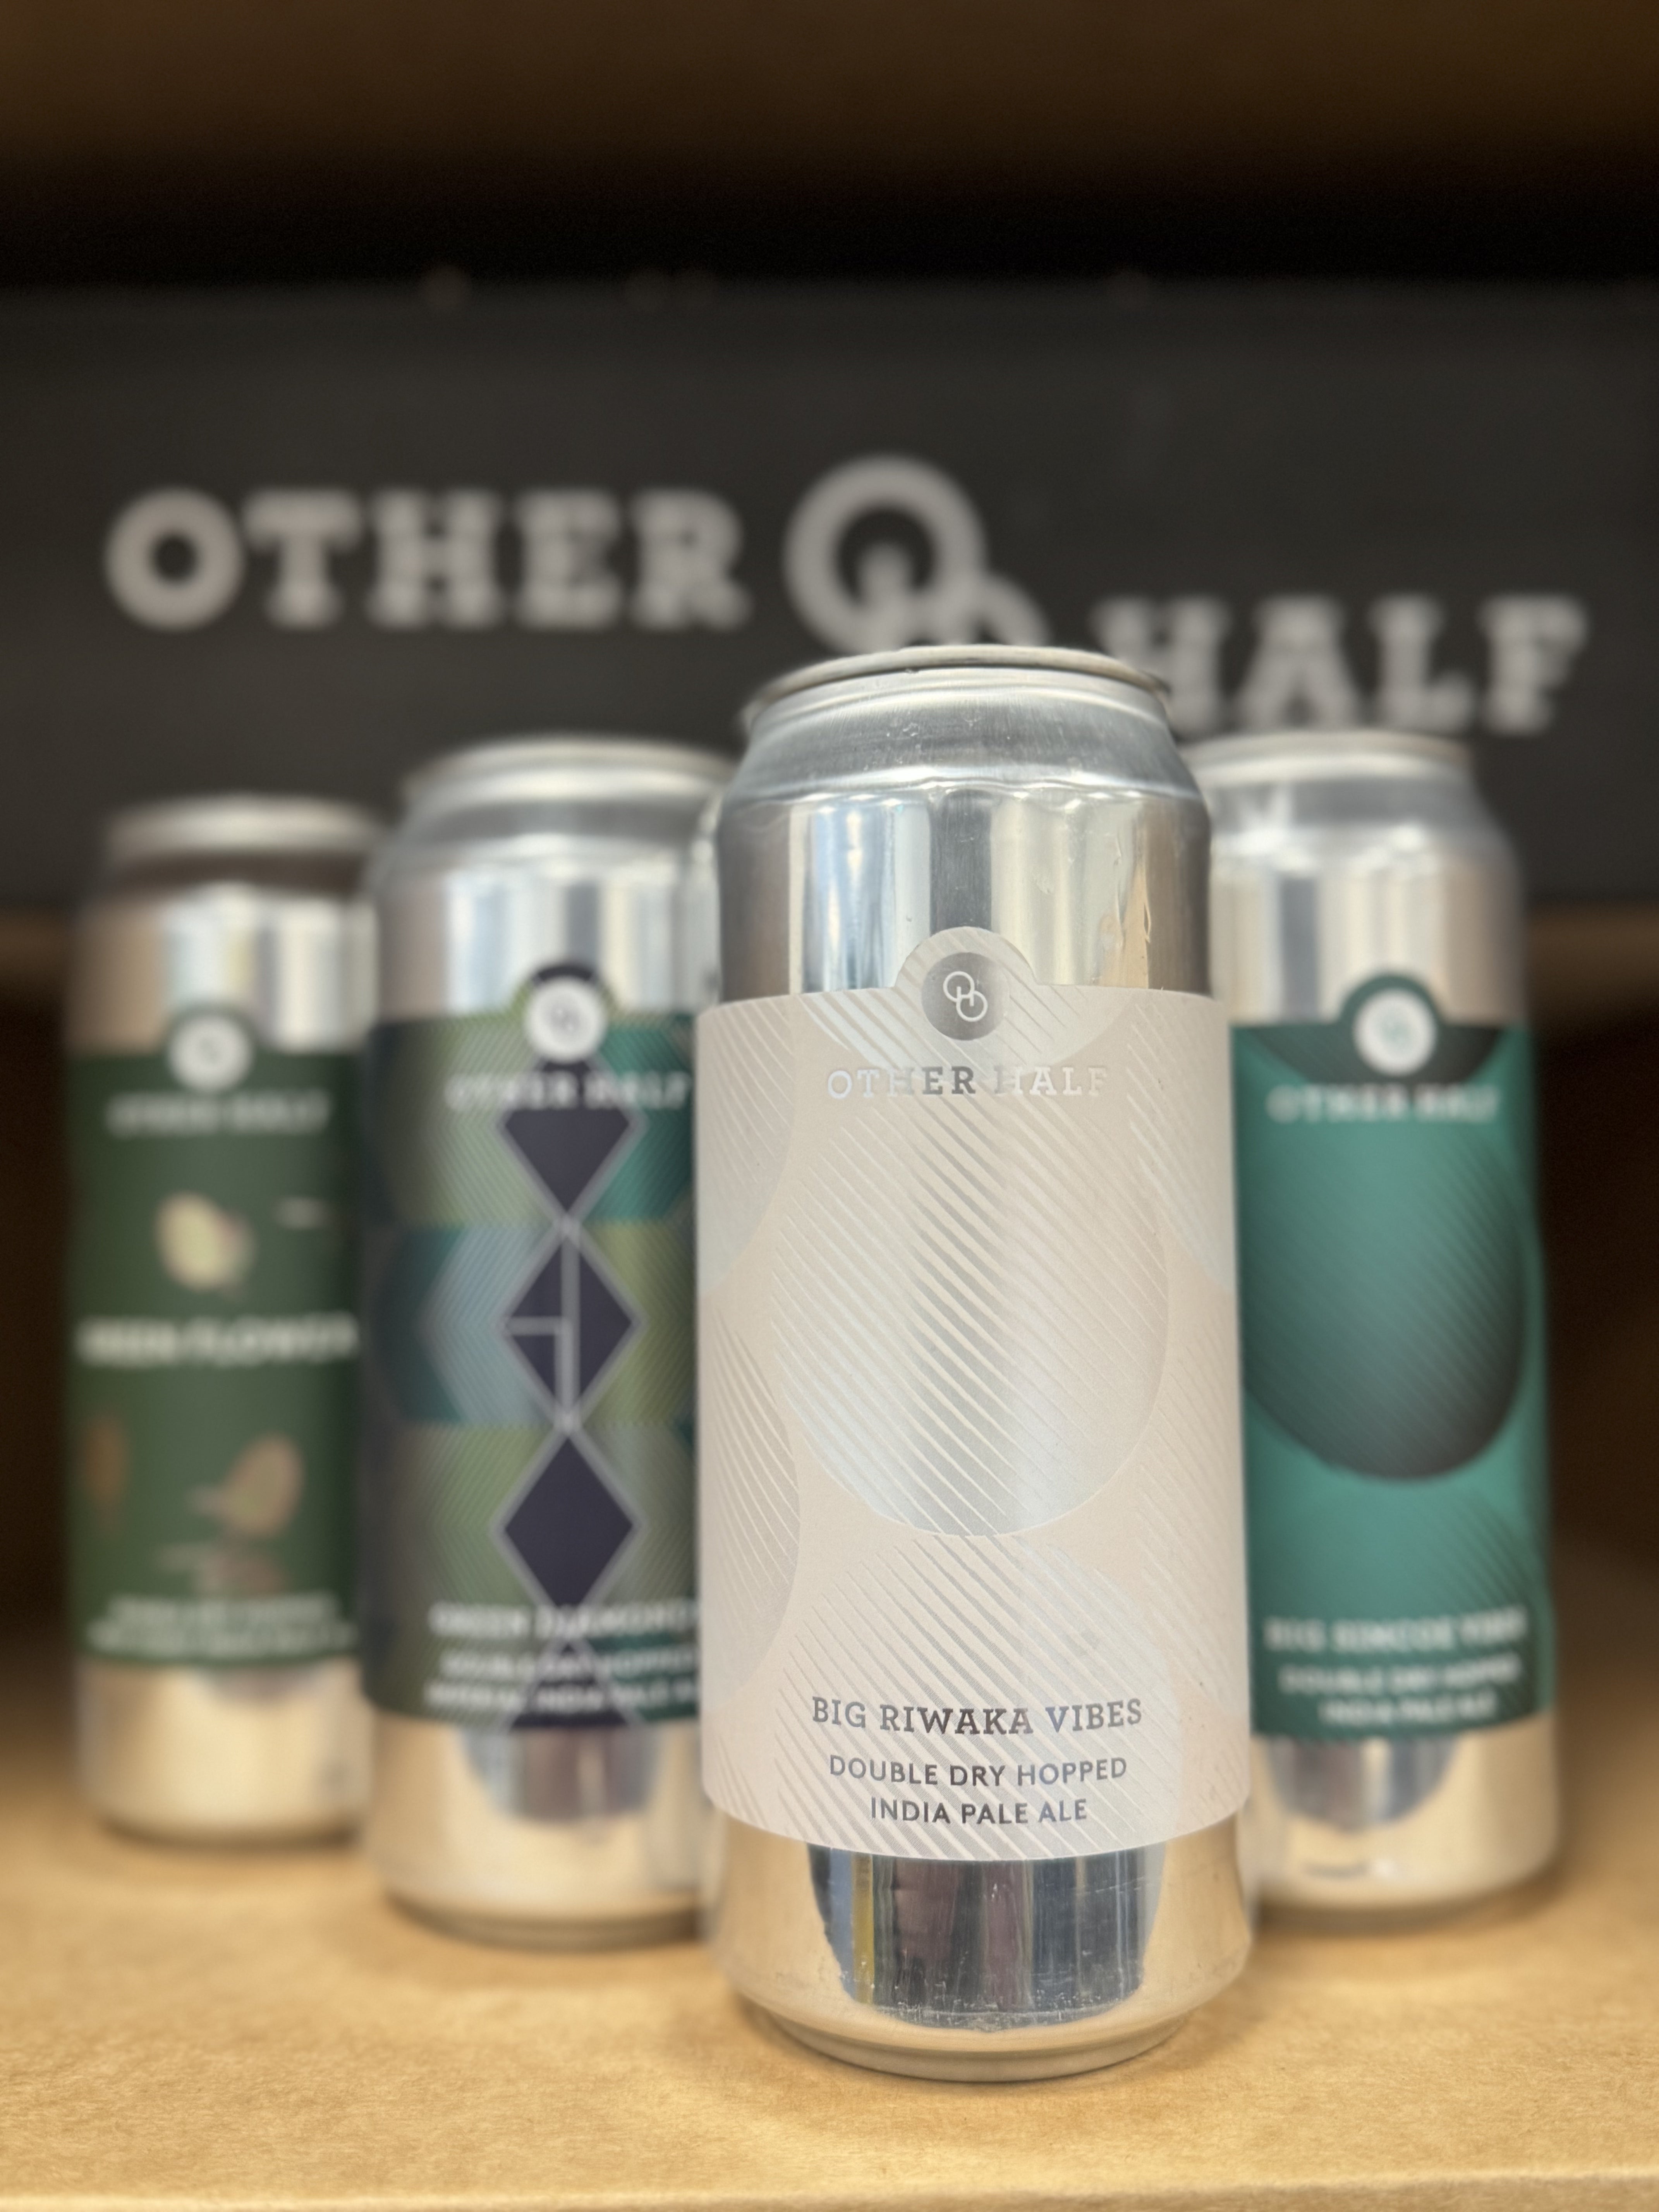 -Other Half- Other Half 🚀 Take Off Set 3-Packs & Cases- Only @ Beer Republic - The best online beer store for American & Canadian craft beer - Buy beer online from the USA and Canada - Bier online kopen - Amerikaans bier kopen - Craft beer store - Craft beer kopen - Amerikanisch bier kaufen - Bier online kaufen - Acheter biere online - IPA - Stout - Porter - New England IPA - Hazy IPA - Imperial Stout - Barrel Aged - Barrel Aged Imperial Stout - Brown - Dark beer - Blond - Blonde - Pilsner - Lager - Wheat -